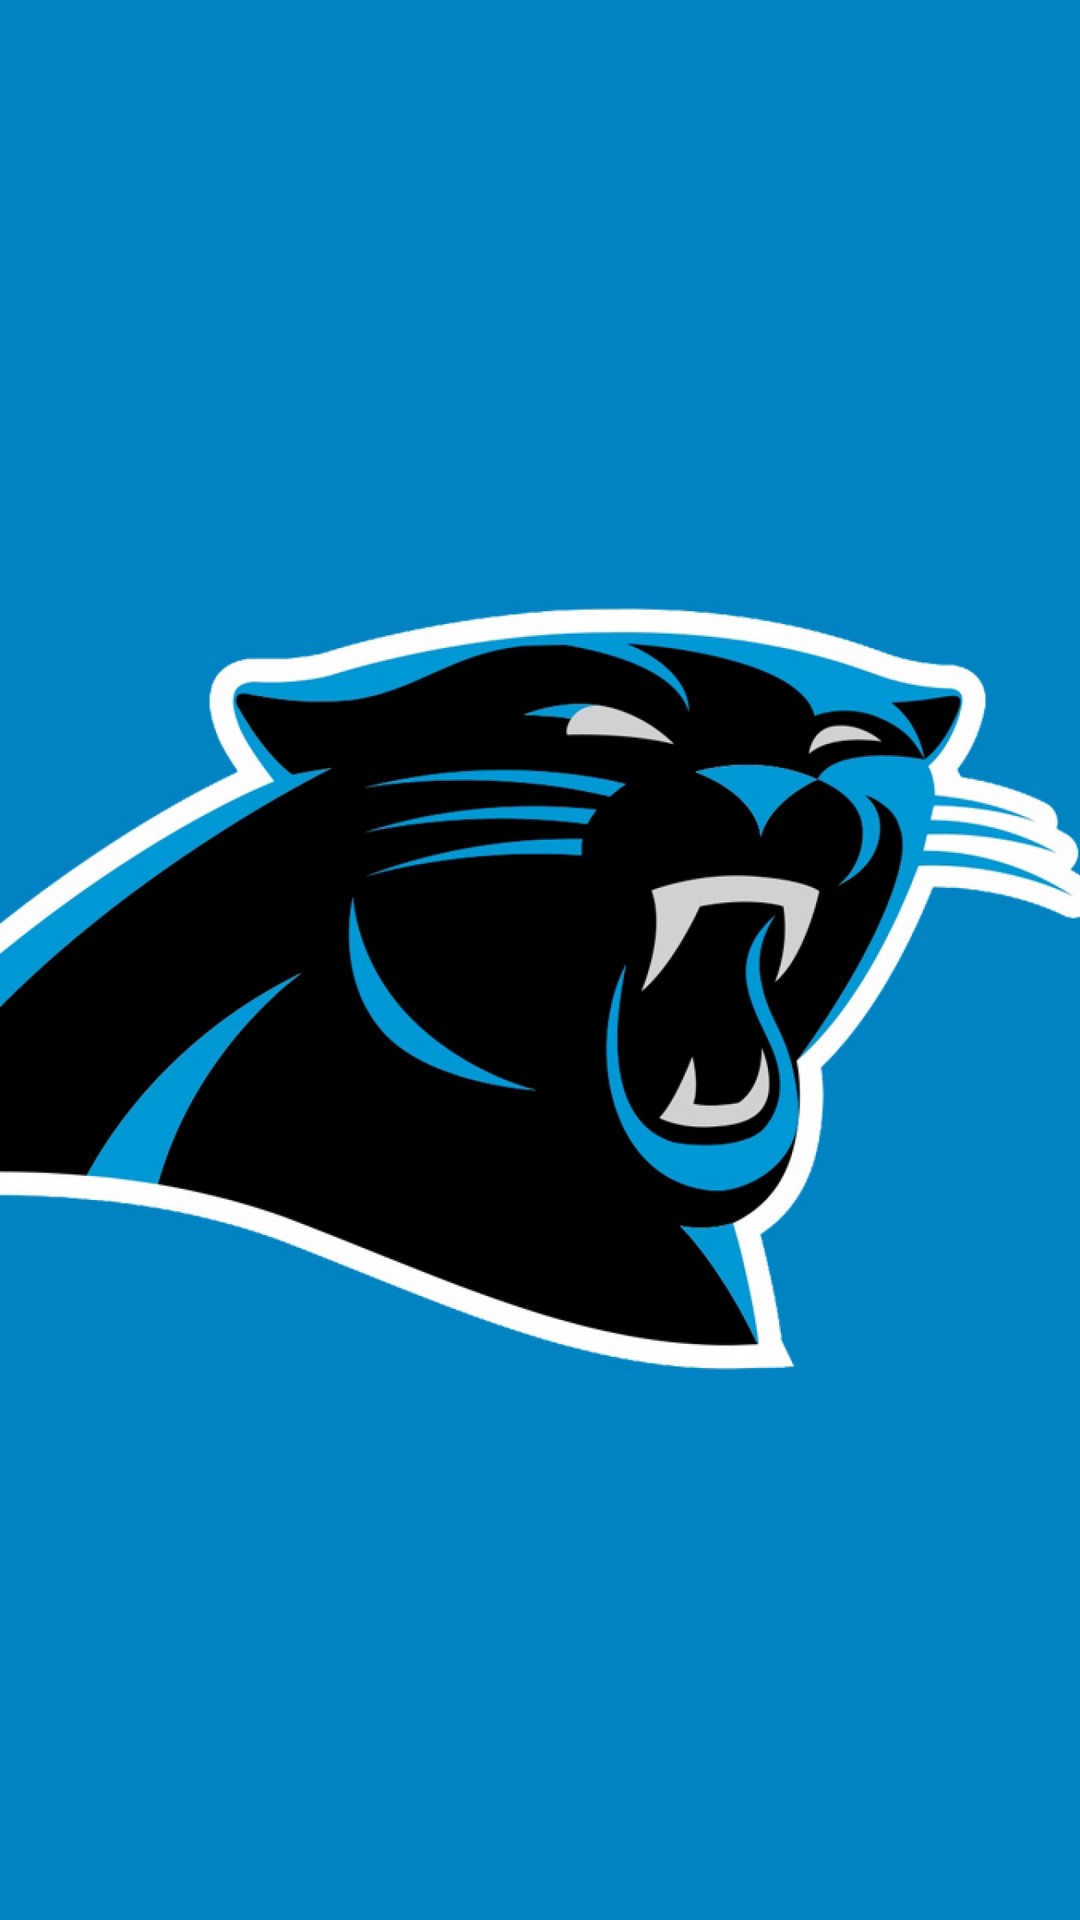 Carolina Panthers iPhone XR Wallpaper with high-resolution 1080x1920 pixel. Download and set as wallpaper for Apple iPhone X, XS Max, XR, 8, 7, 6, SE, iPad, Android